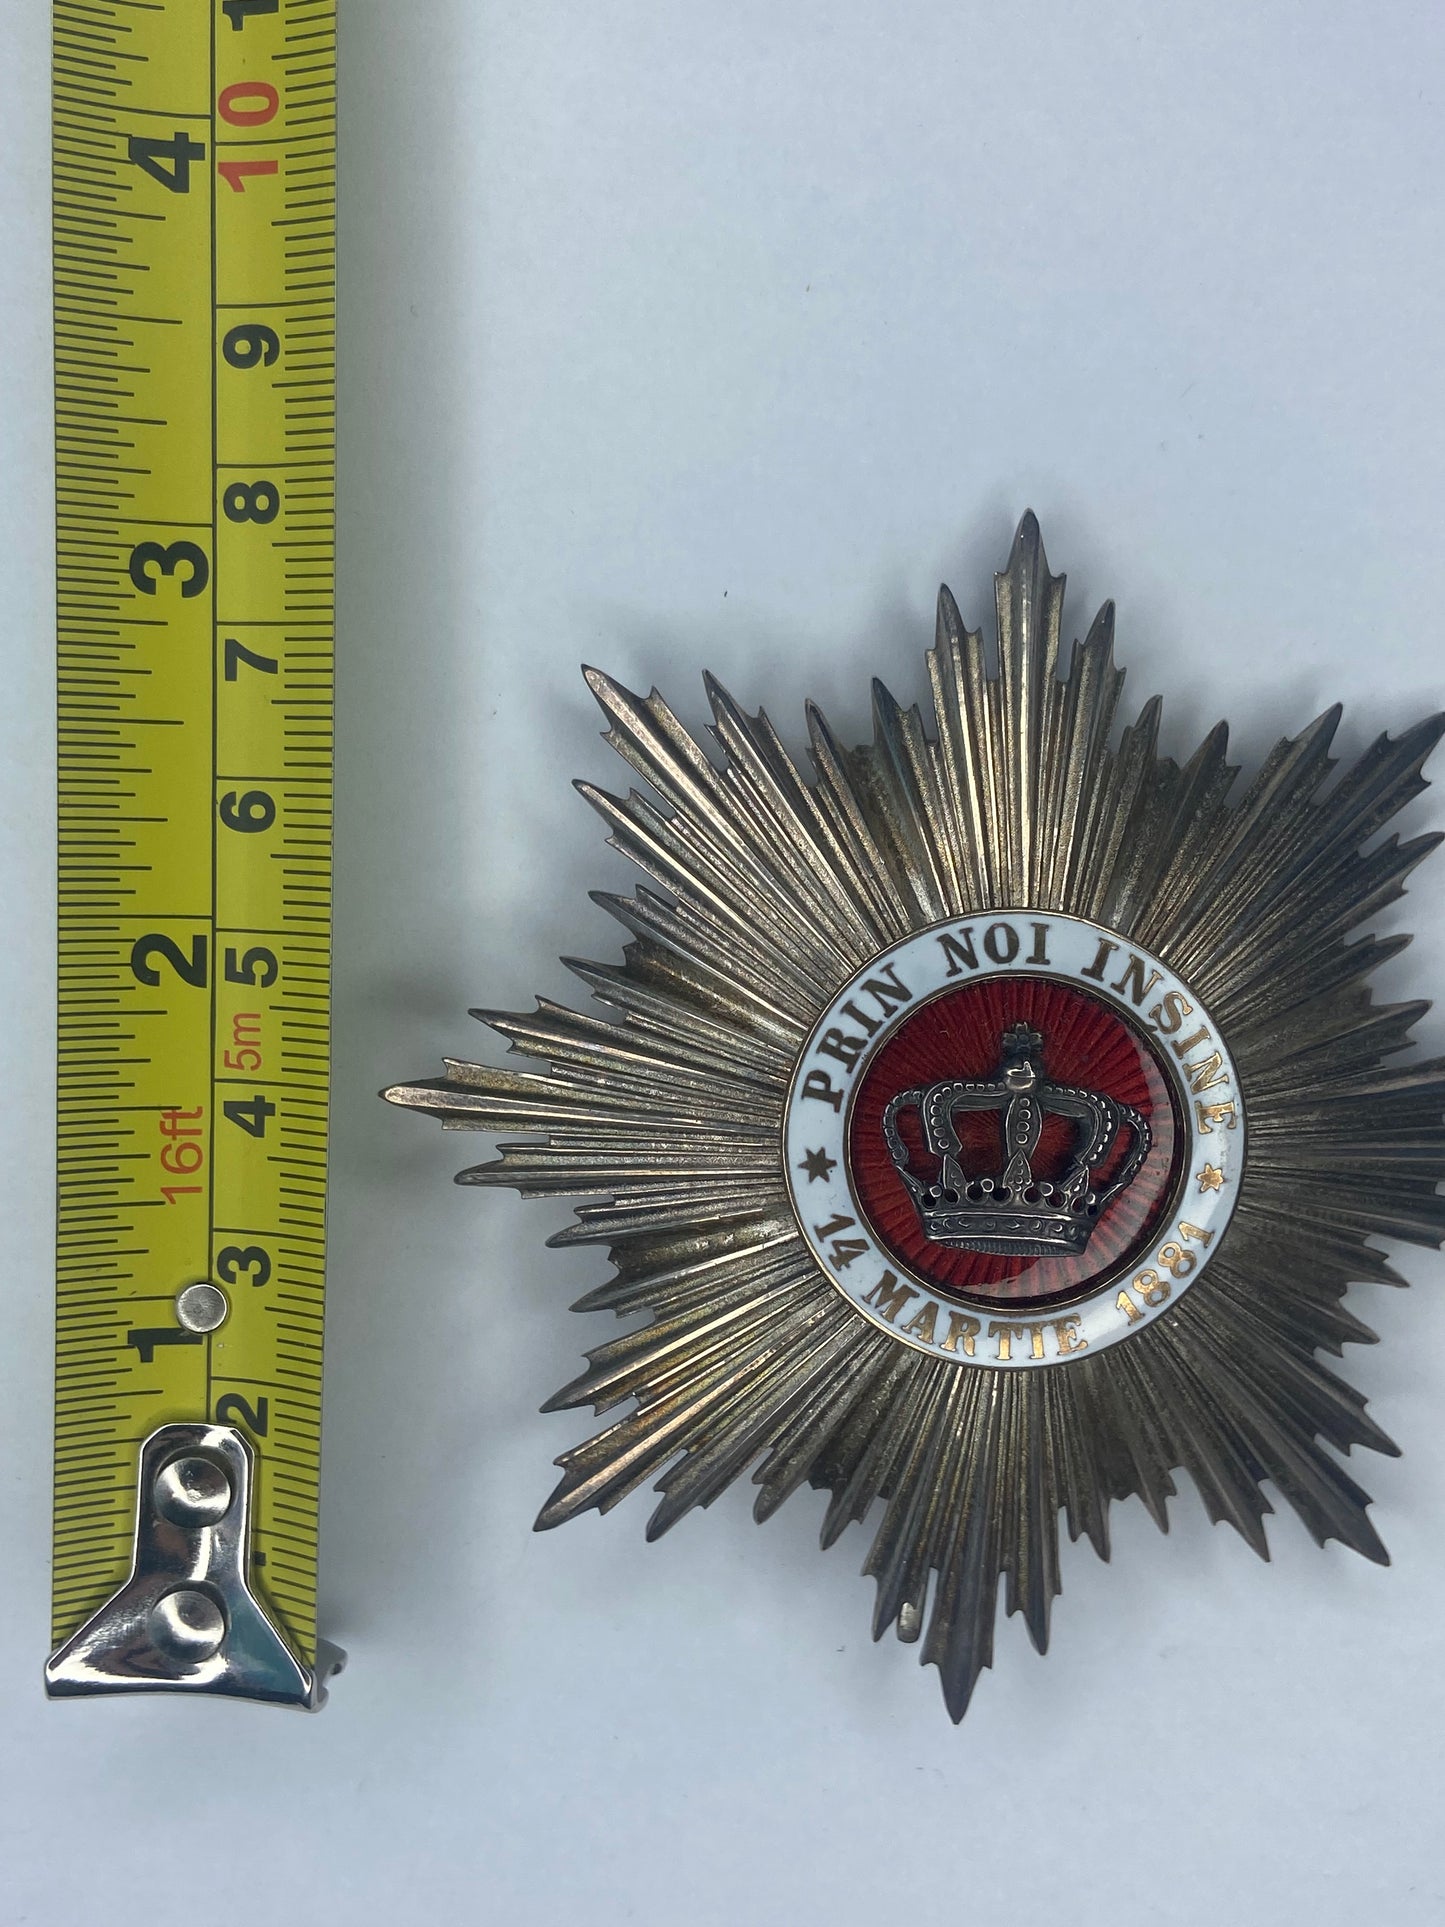 Romania Kingdom Order of the Crown Grand Officer Neck Badge & Breast Star. Type 1. Made by “RESCH”. Silver. In king Ferdinand Box. RR!!